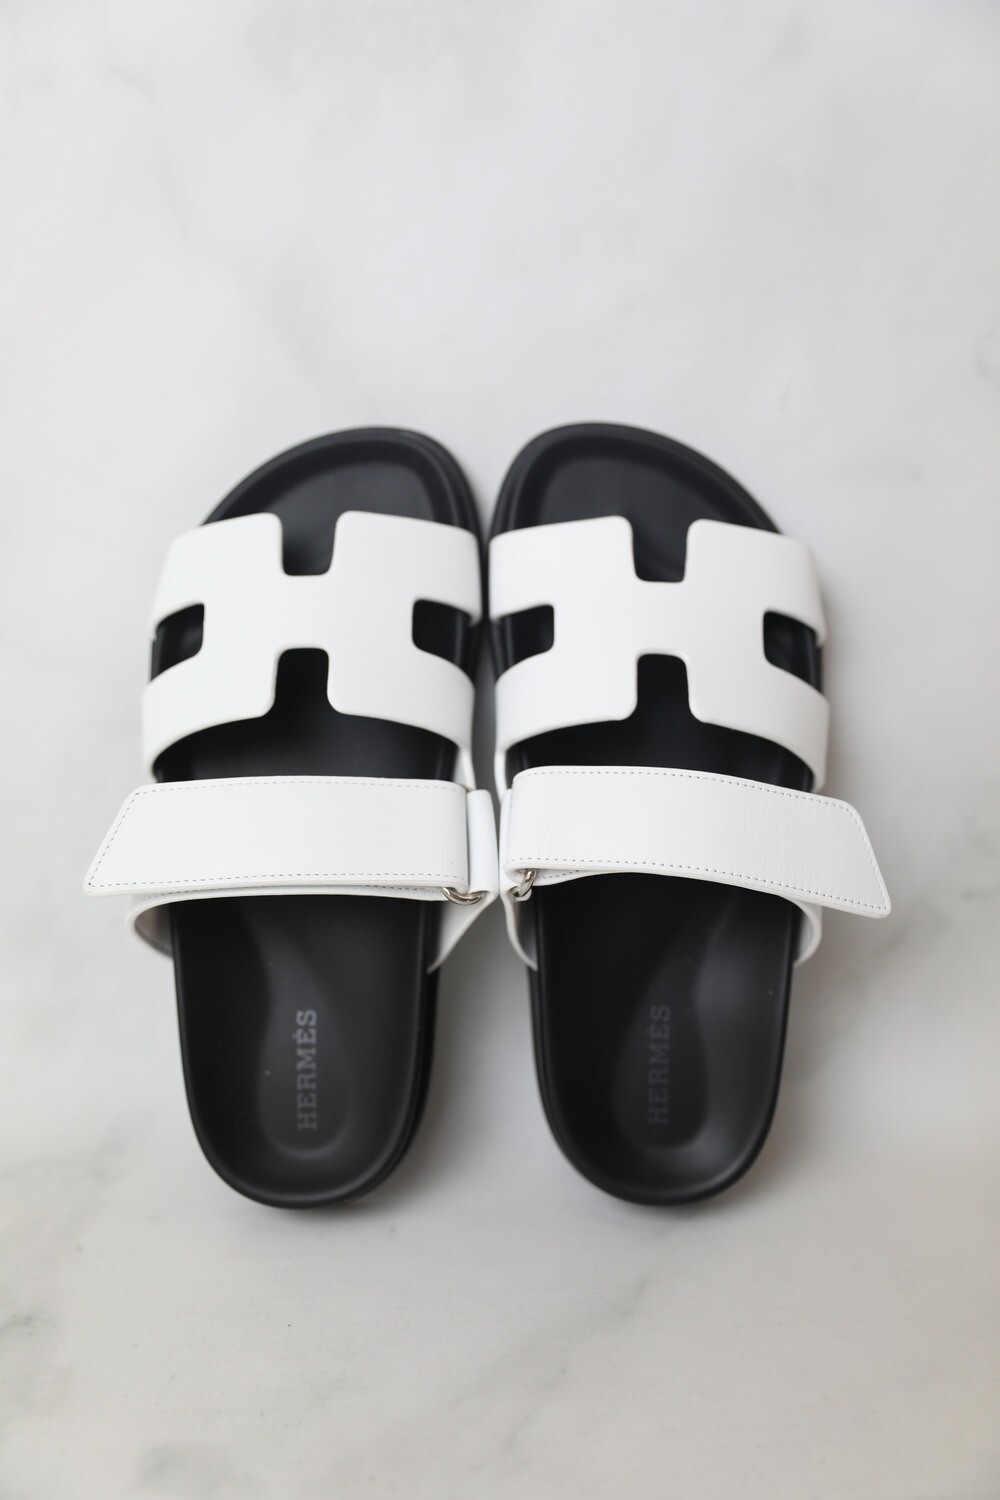 Hermes Chypre Sandals, Size 37, White and Black, New in Box WA001